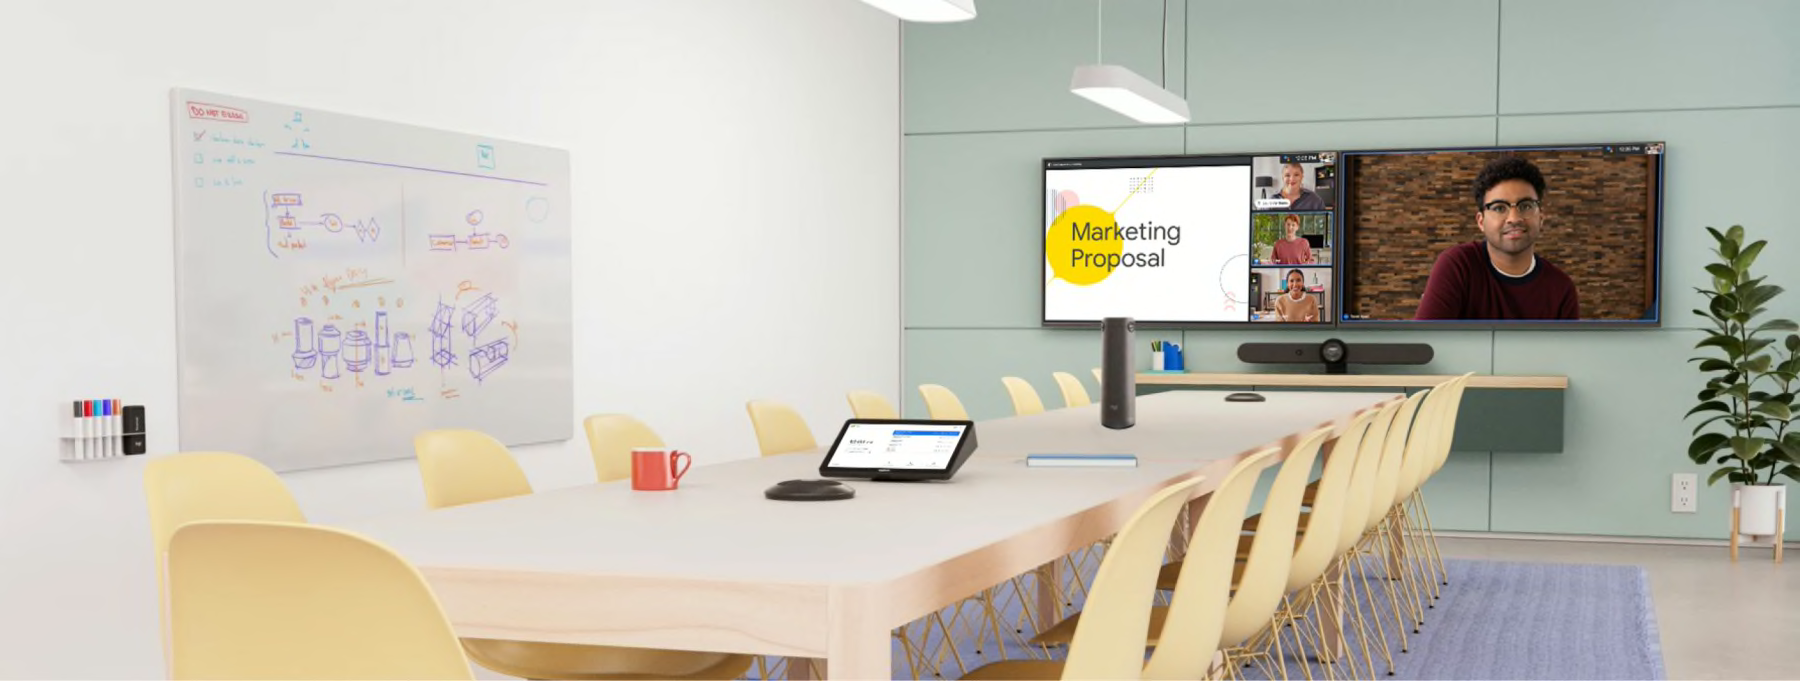 Google meet Solutions for boardroom space